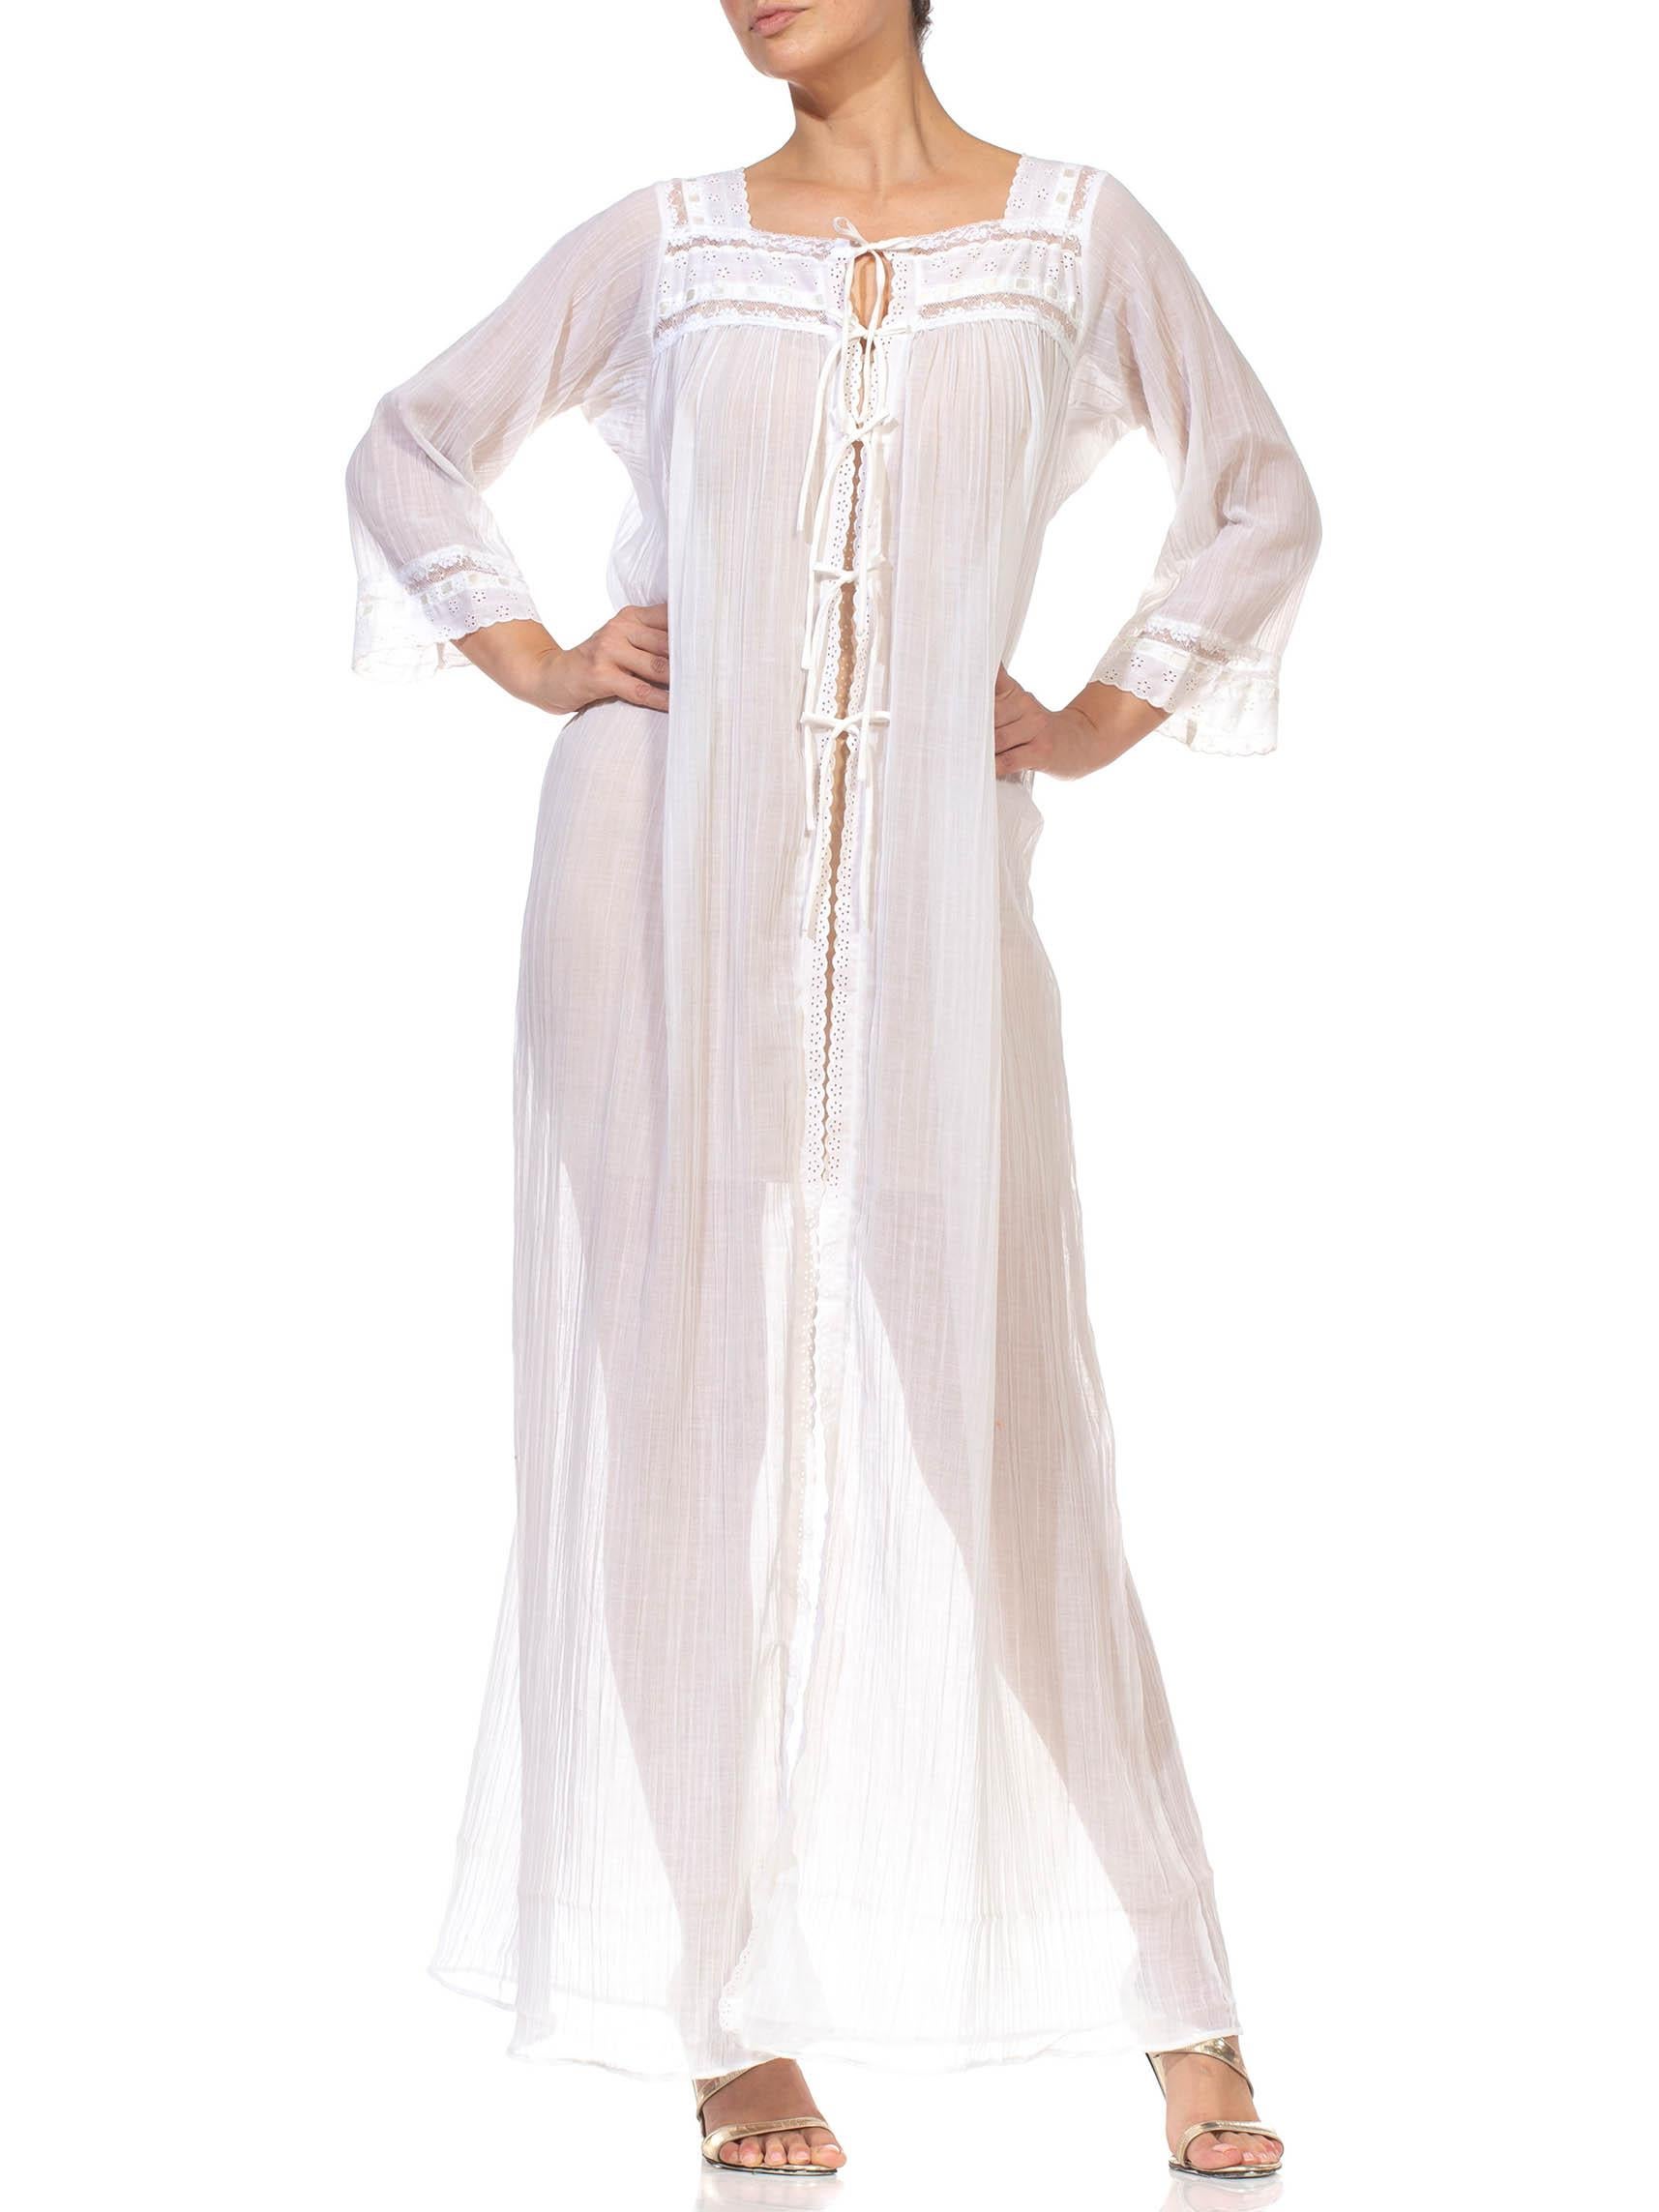 1980S CHRISTIAN DIOR White Cotton Lace Trimed Robe With Front Tie Closure 1